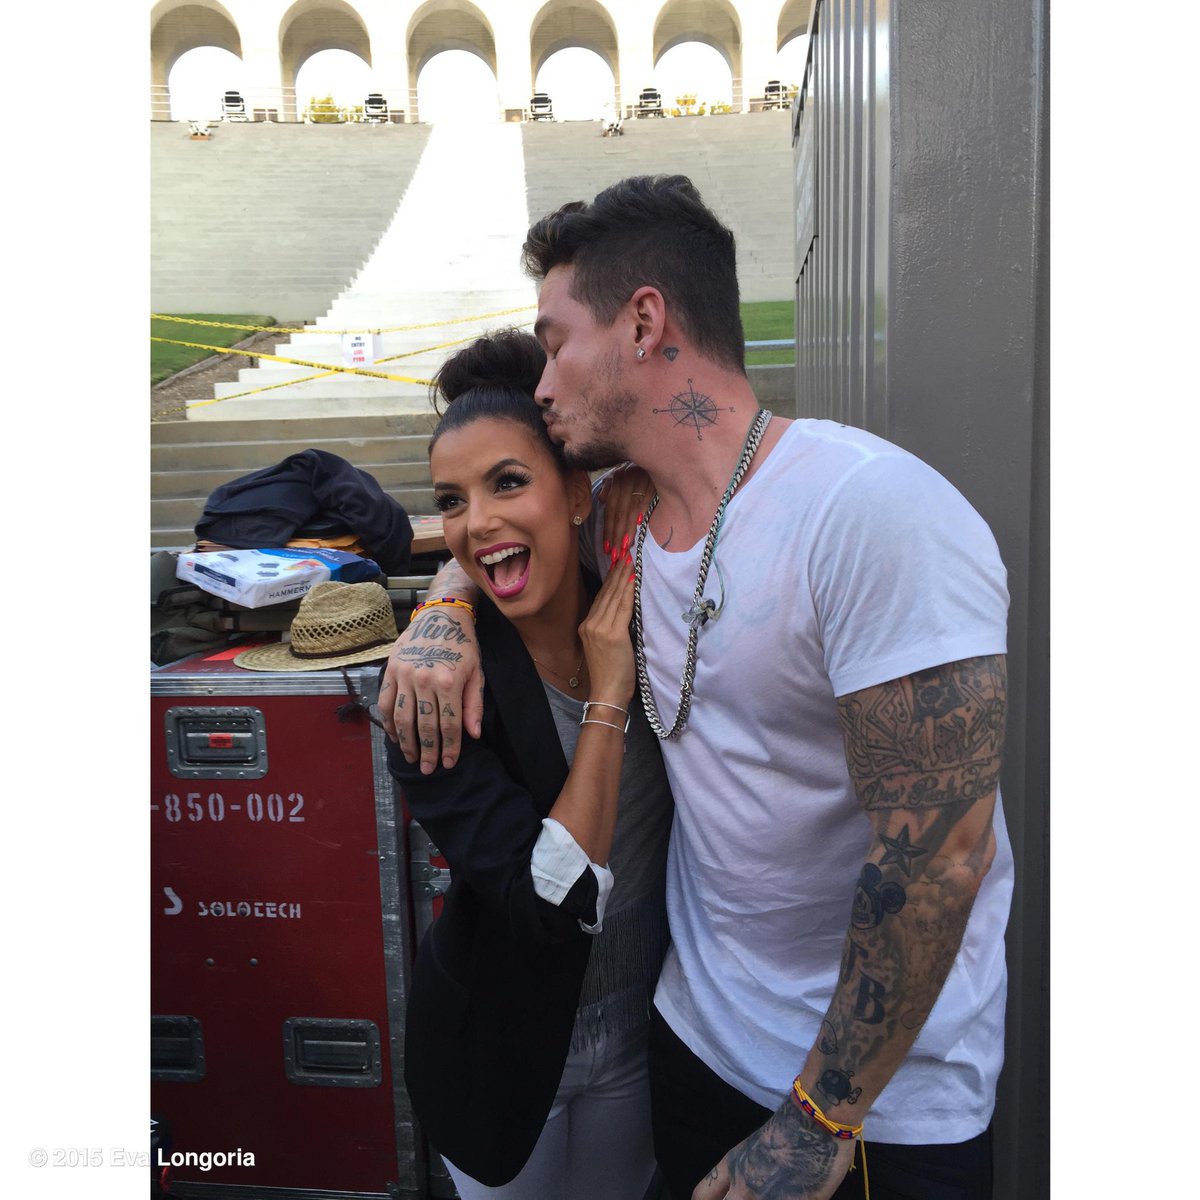 Backstage at the Special Olympics World Games with @jbalvin! #ReachUpLA @LA2015 @ESPN http://t.co/nl6lezxwJM